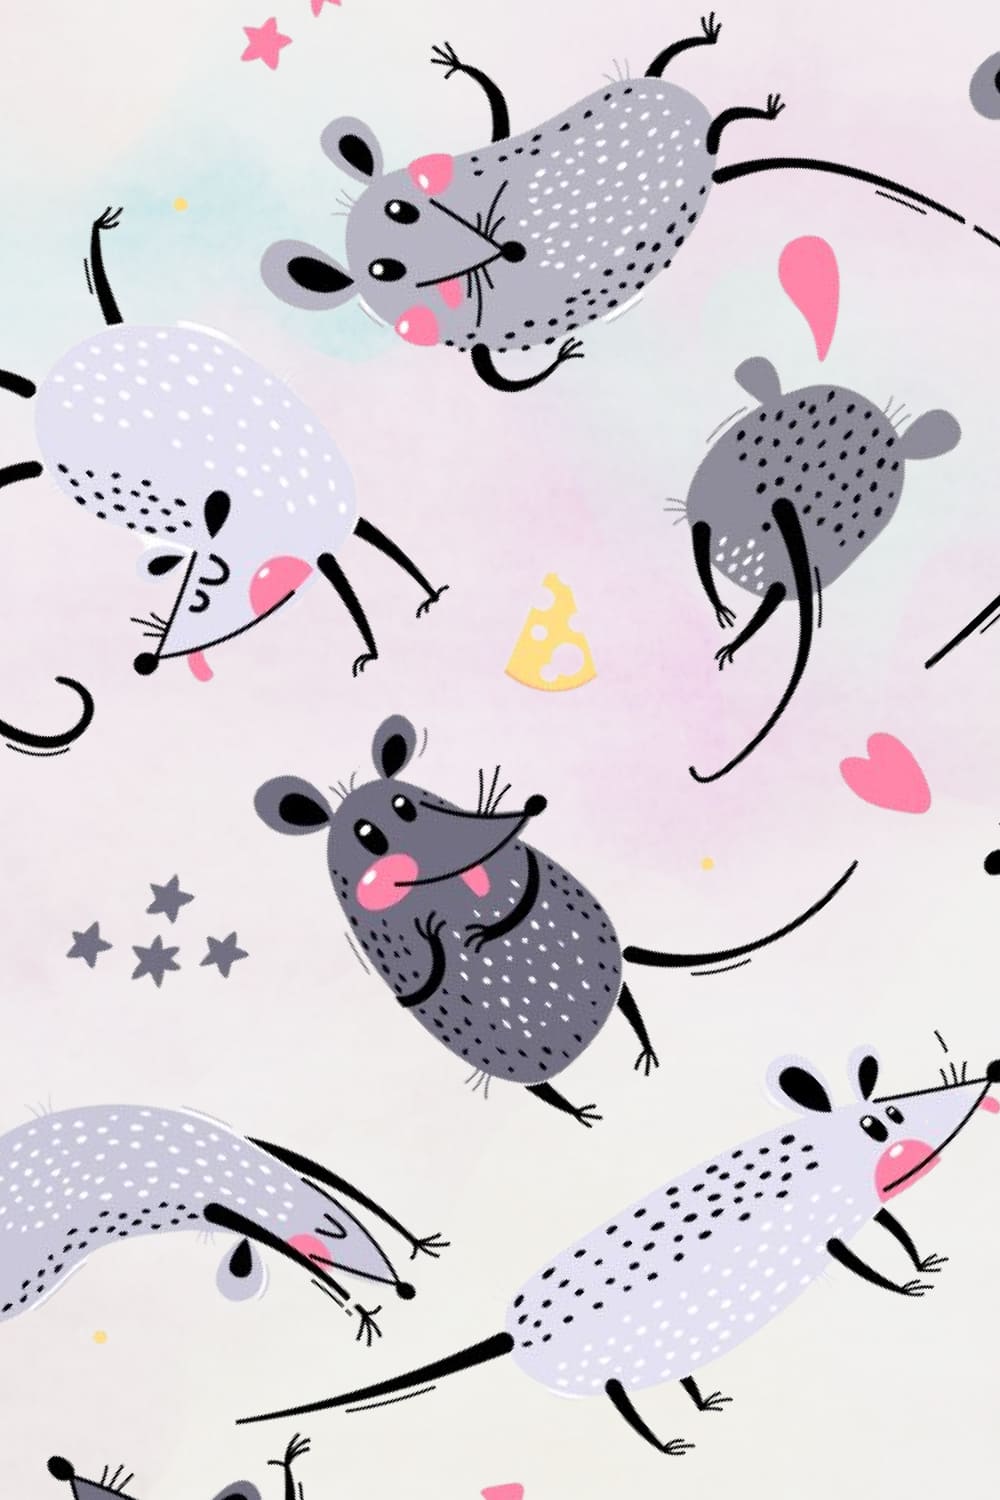 Diverse of cute illustrations with rats.